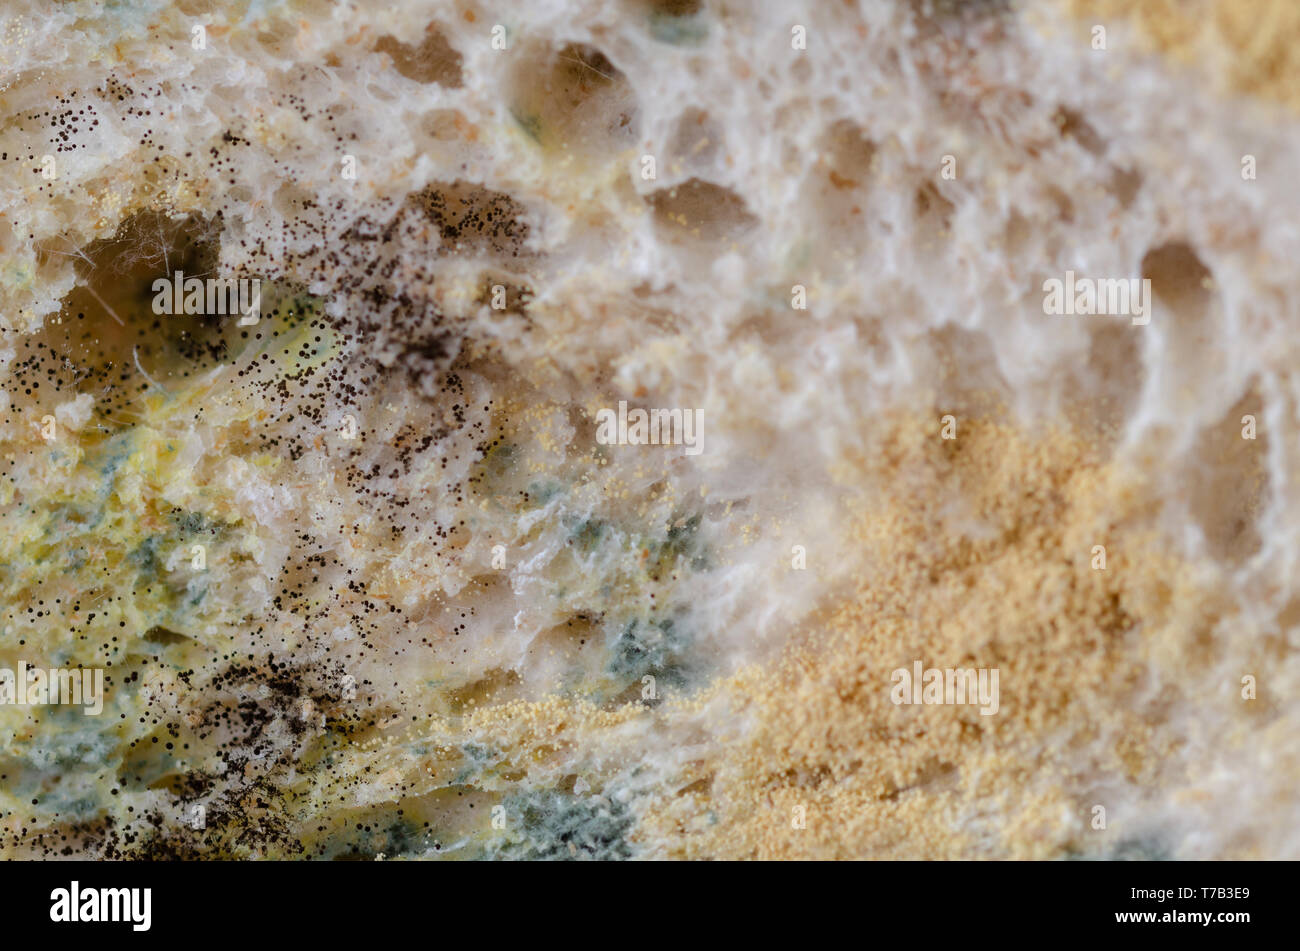 Moldy bread slices close up. .Moldy inedible food. Stock Photo